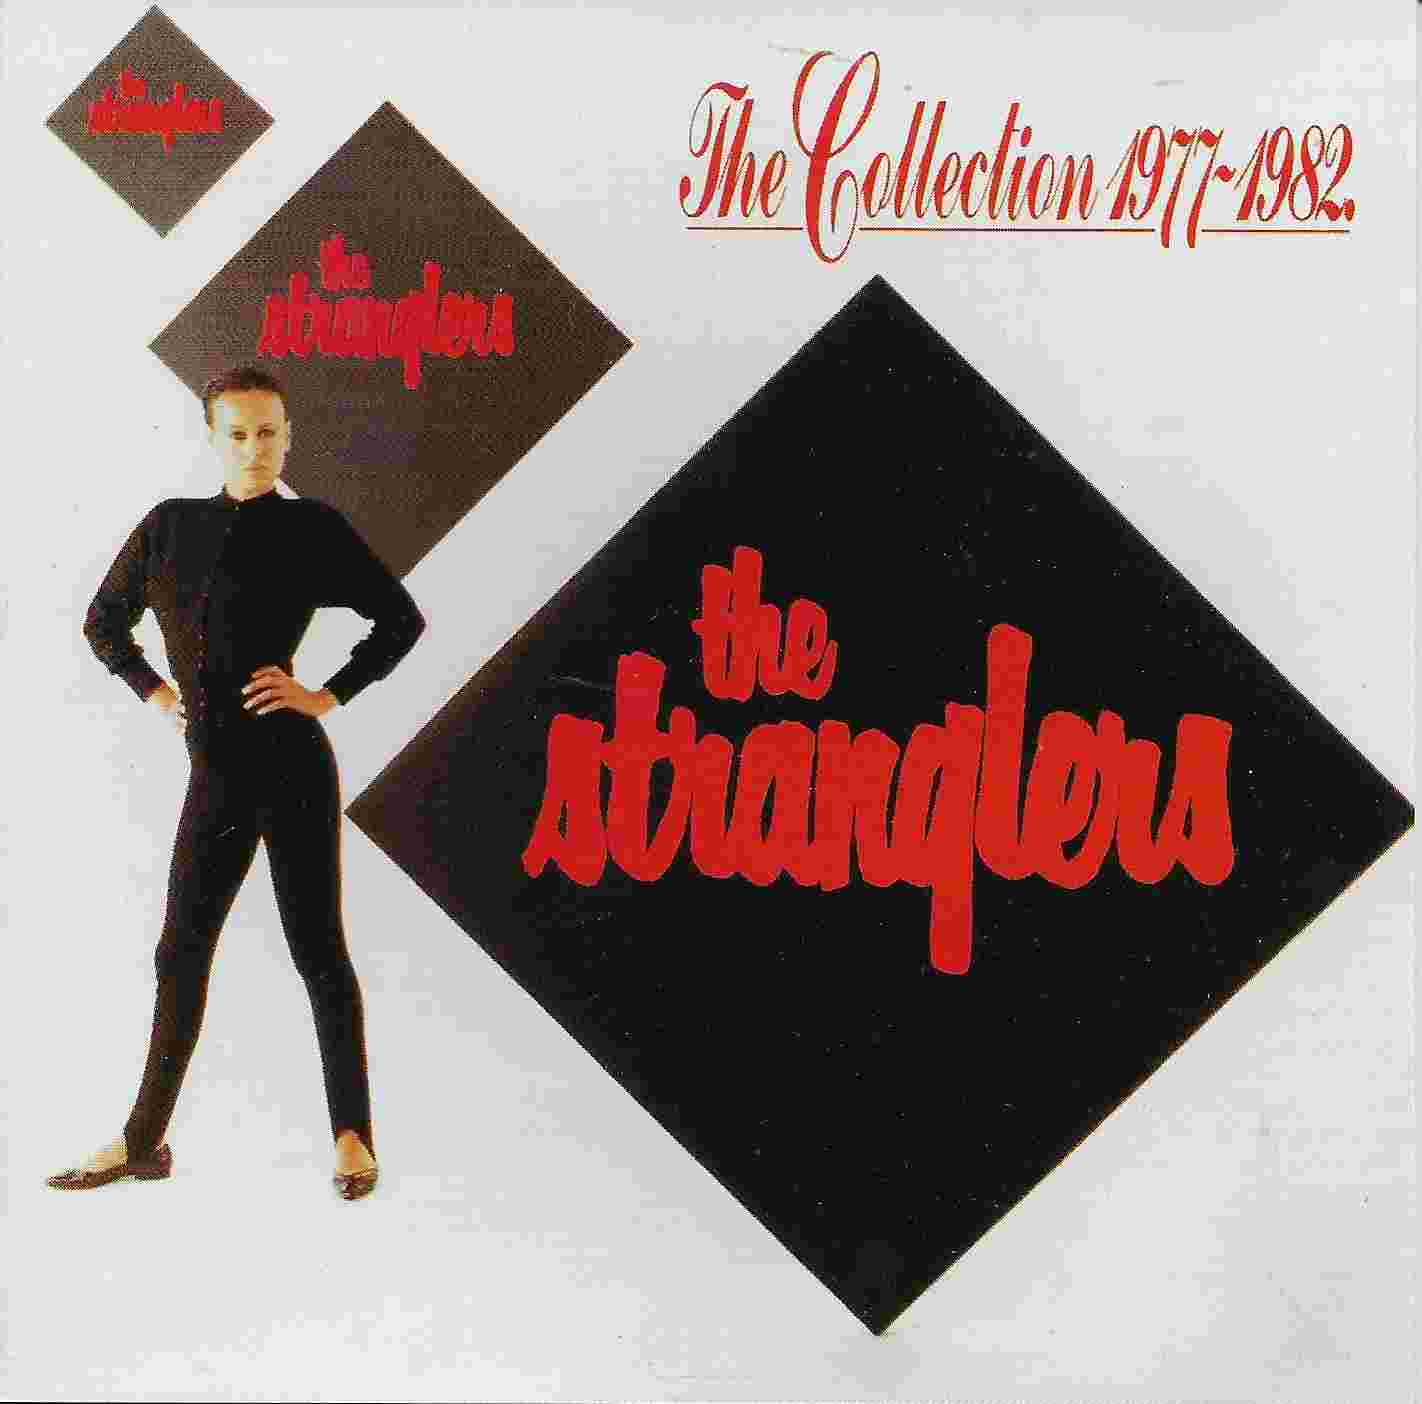 Picture of CDP 746066-2 The collection 1977 - 1982 by artist The Stranglers